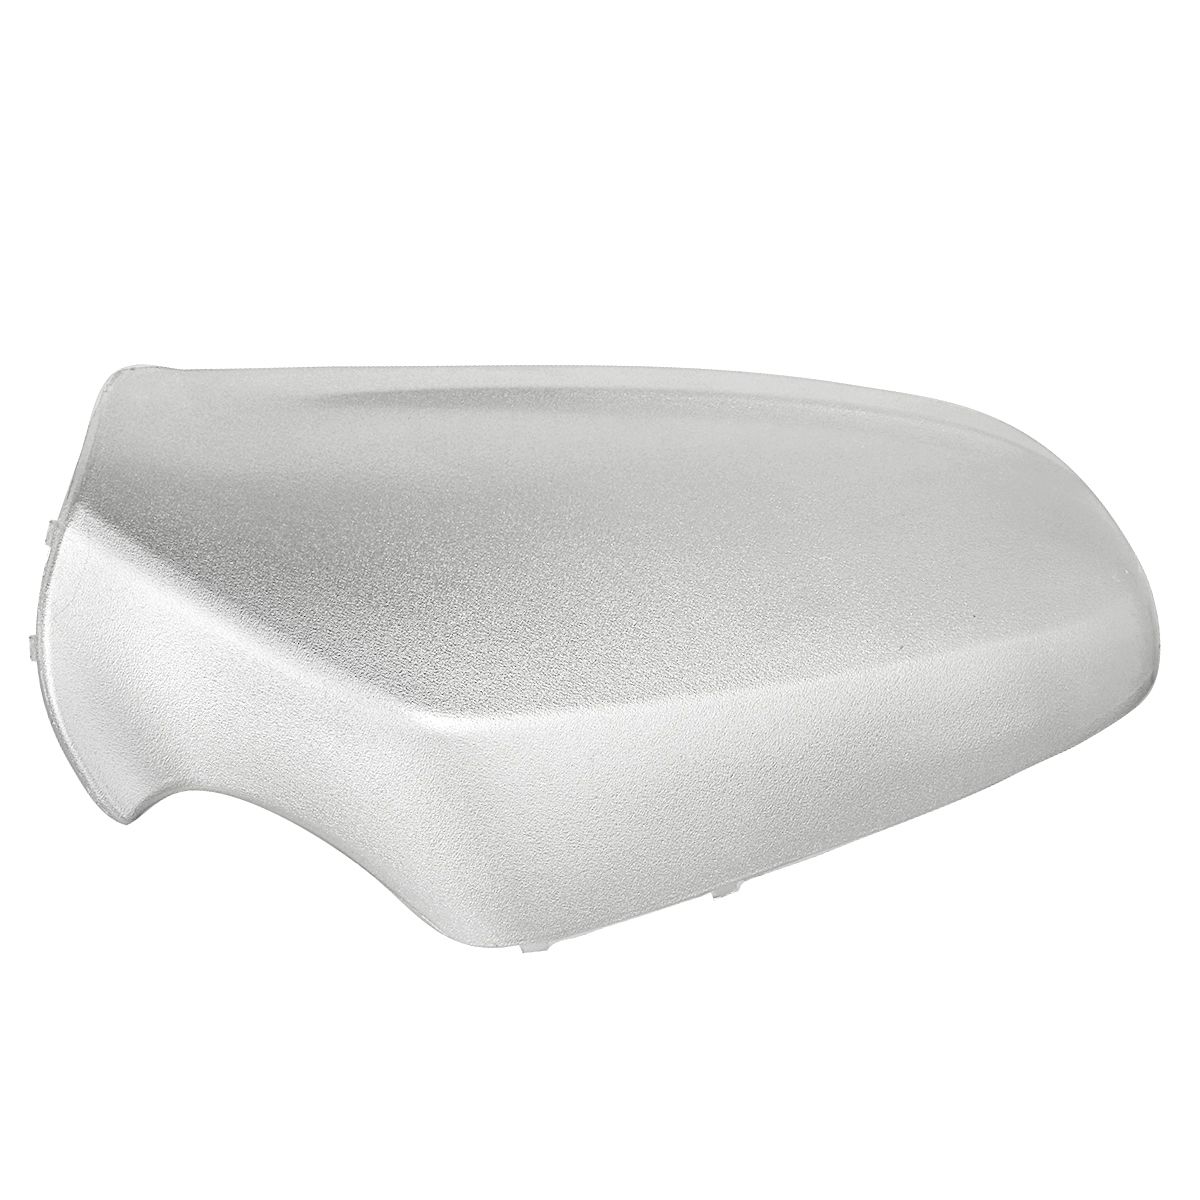 Left-Door-Wing-Mirror-Cover-Silver-NS-Passenger-For-Vauxhall-Astra-H-MK5-2005-2009-1700170